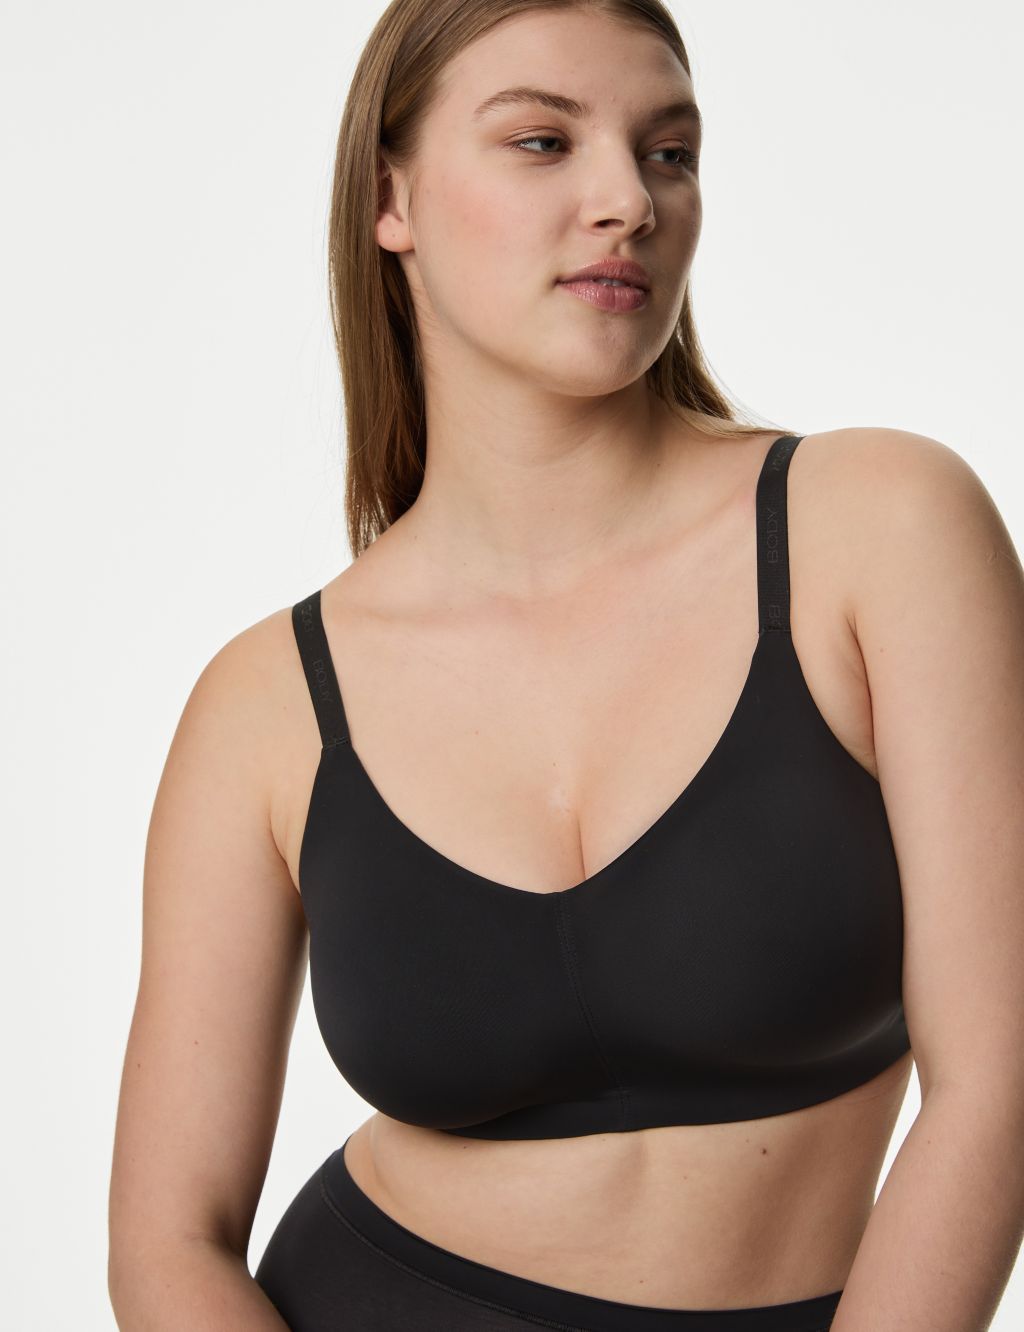 M&S BODY NON WIRED SMOOTHING FULL CUP Bra with FLEXIFIT In ROSE